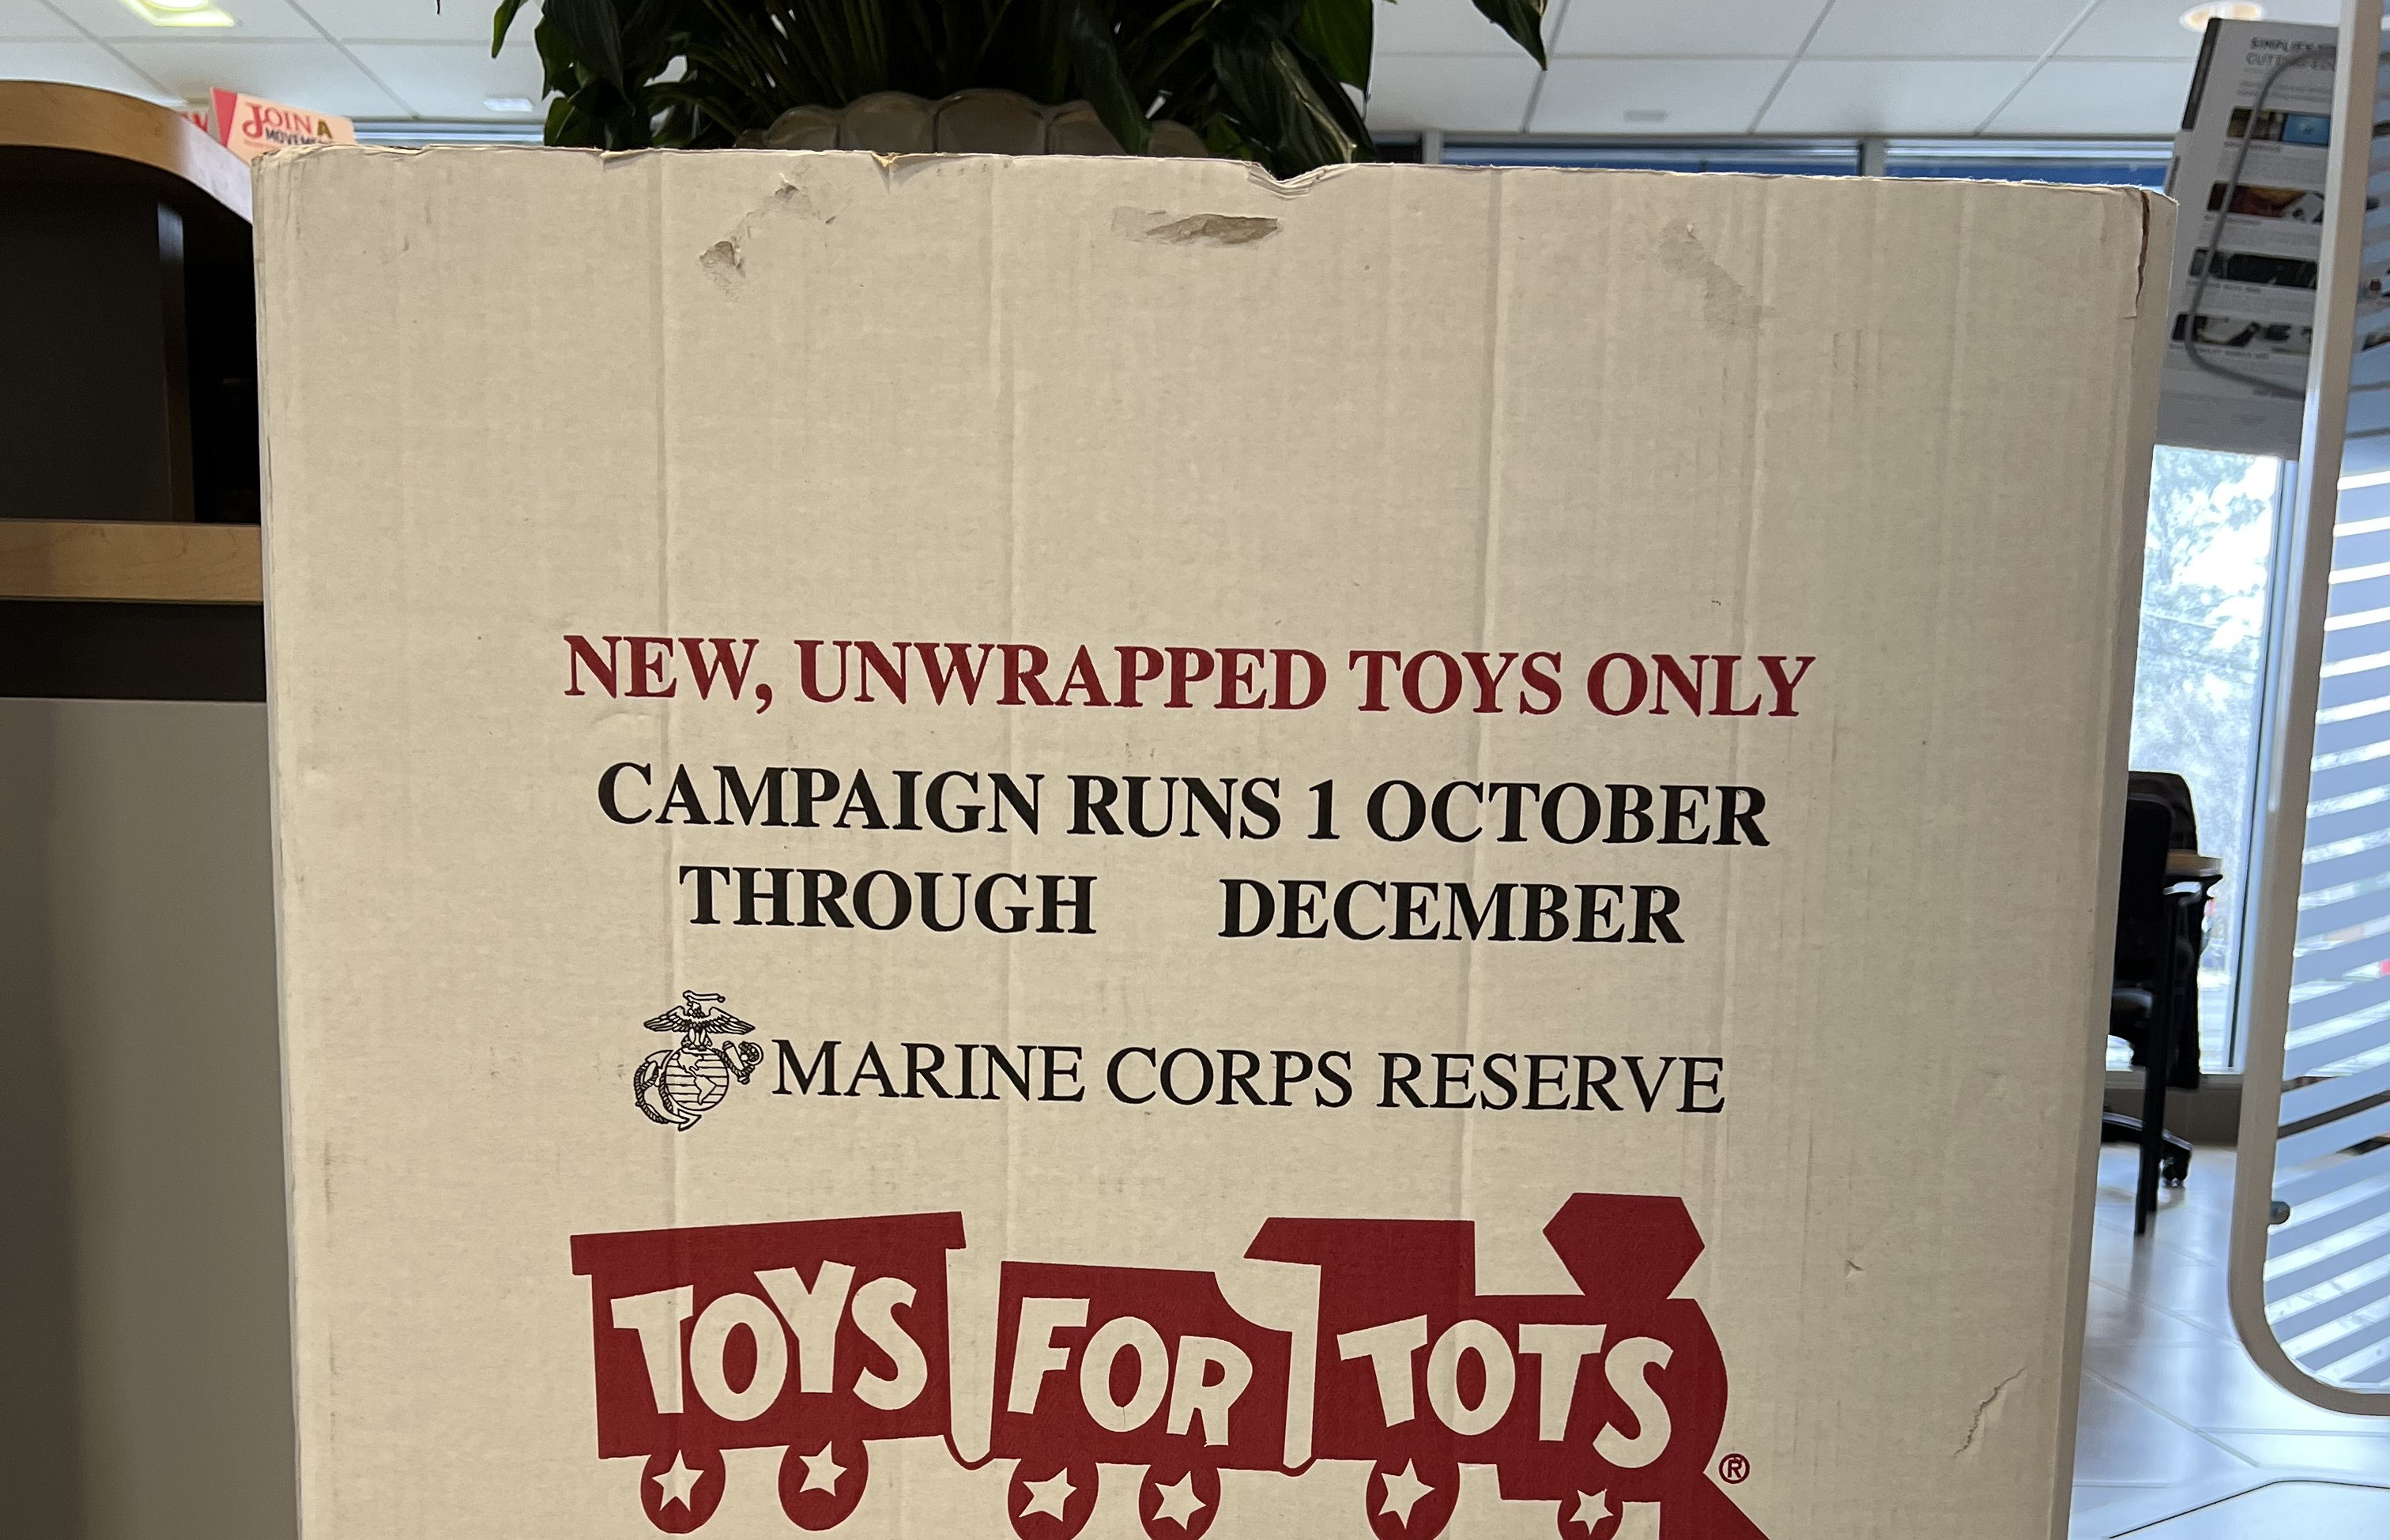 Toys For tots Box, words on it read New Unwrapped Toys Only, Campaign Runs 1 October through December